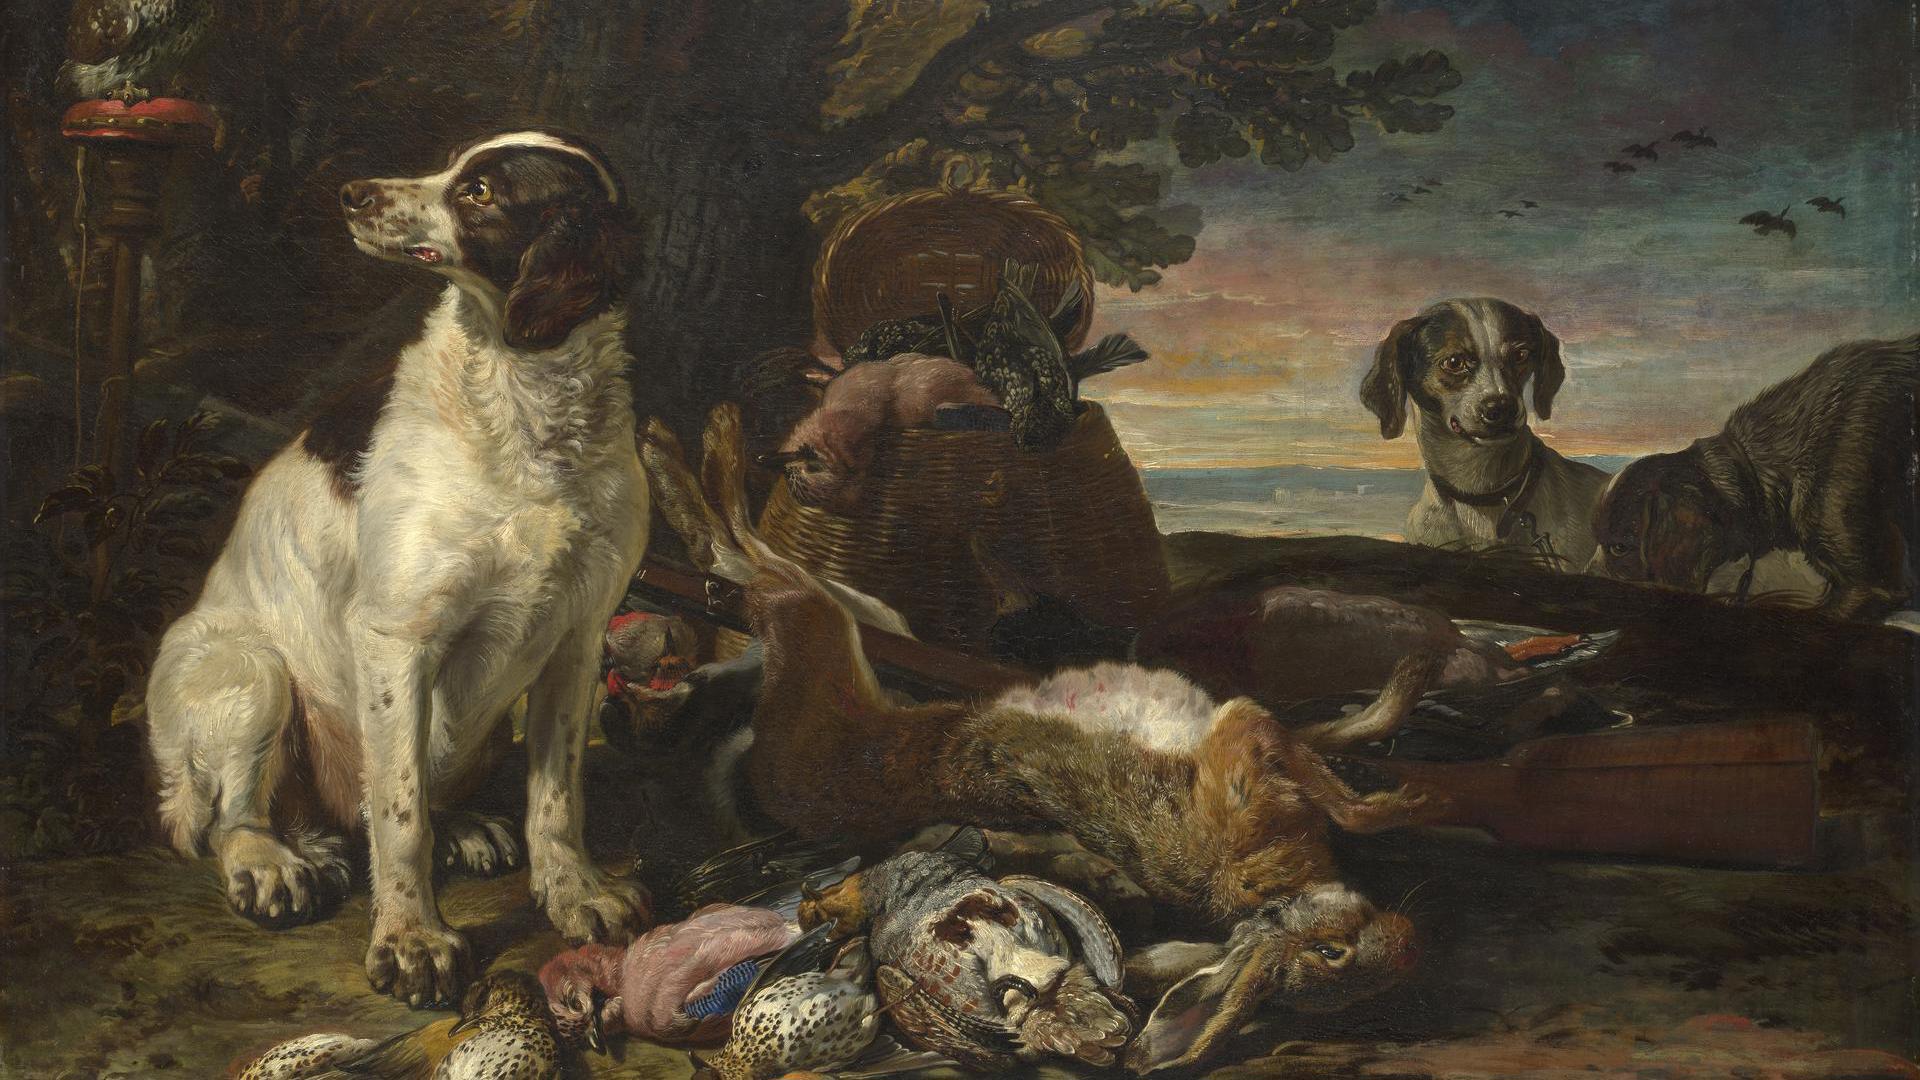 Dead Birds and Game with Gun Dogs and a Little Owl by David de Coninck